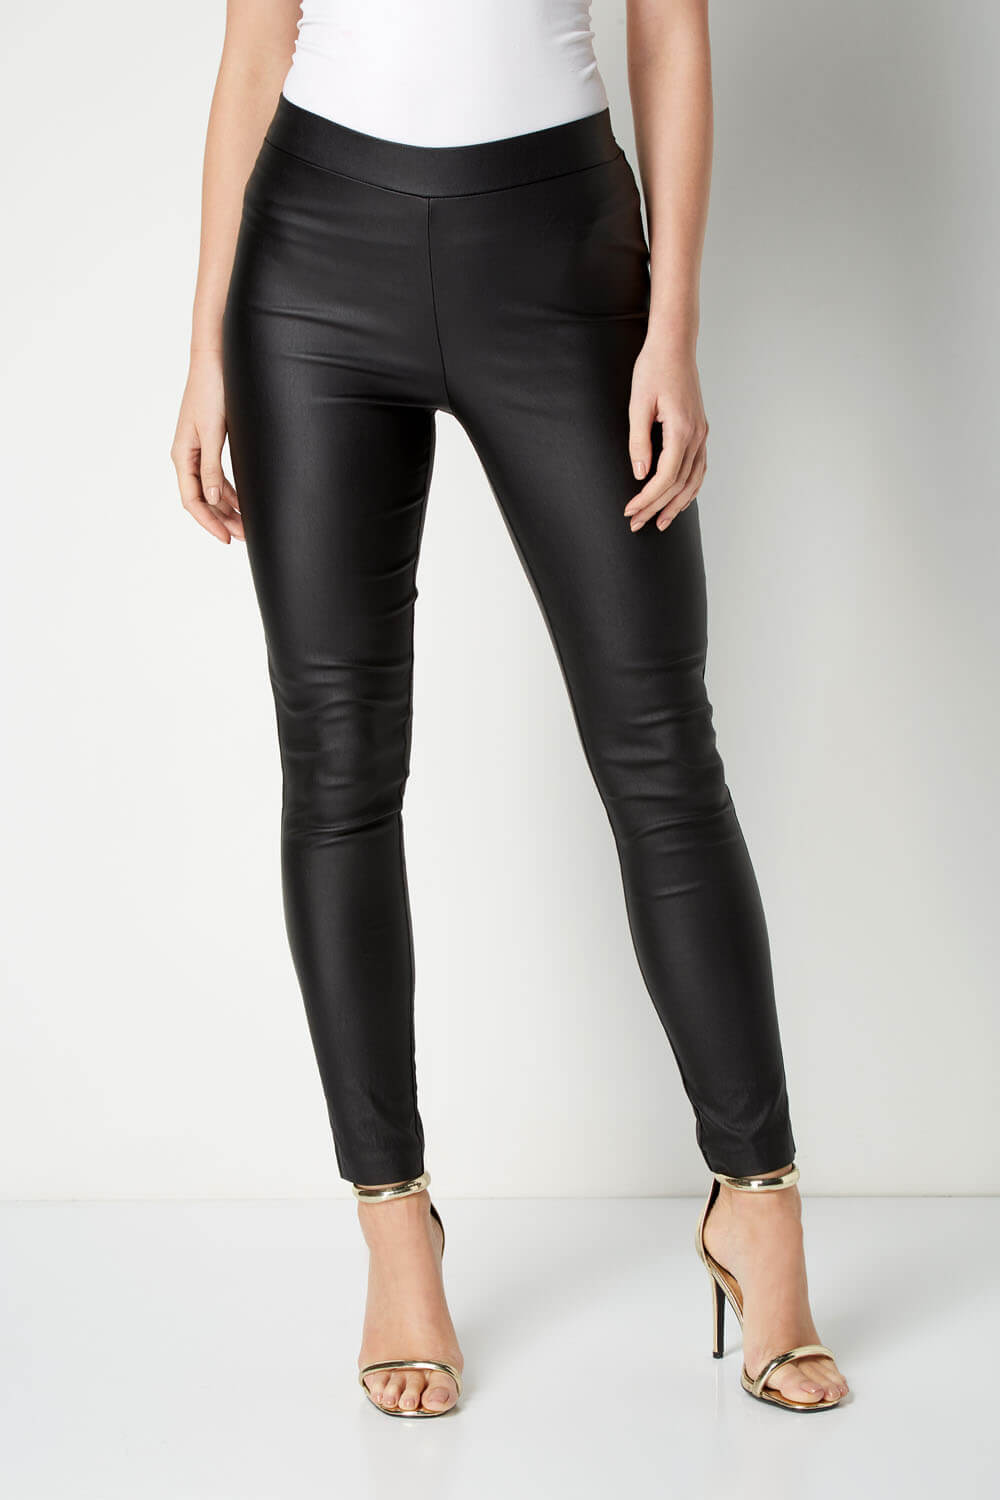 Black Faux Leather Split Hem Trousers  Leather trousers outfit, How to hem  pants, Leather leggings outfit